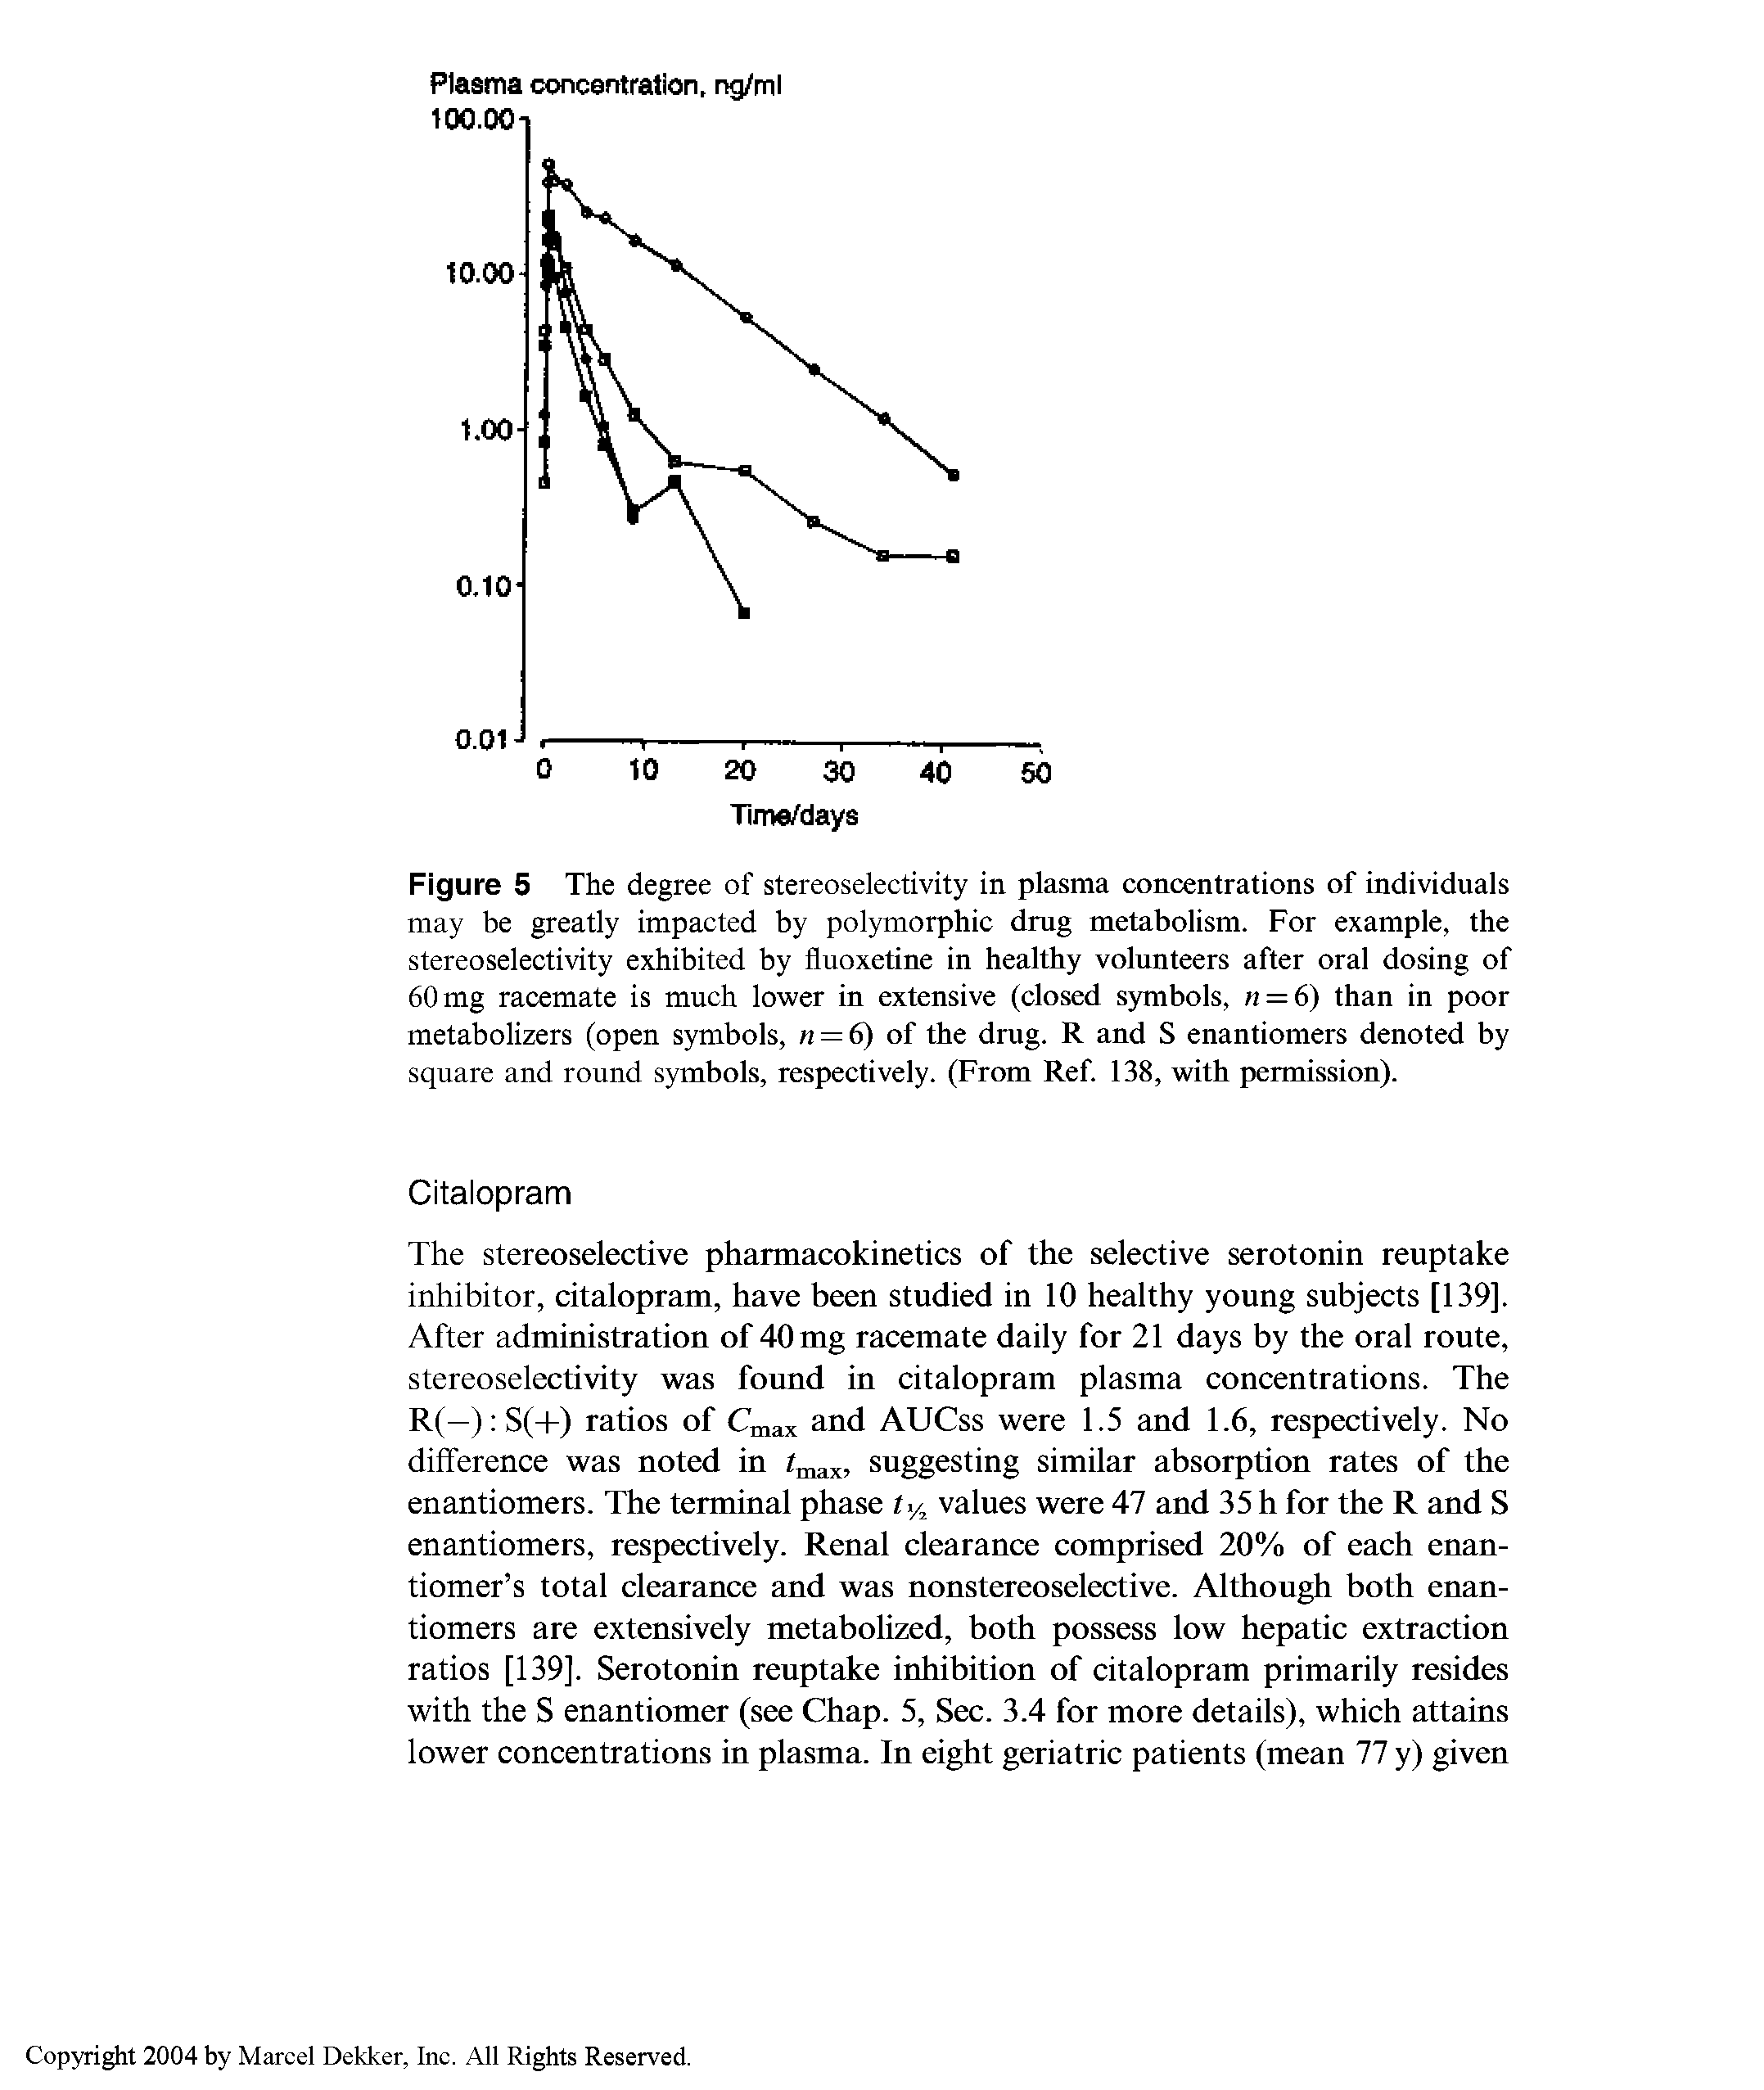 Figure 5 The degree of stereoselectivity in plasma concentrations of individuals may be greatly impacted by pol5miorphic drug metabolism. For example, the stereoselectivity exhibited by fluoxetine in healthy volunteers after oral dosing of 60 mg racemate is much lower in extensive (closed symbols, n = 6) than in poor metabolizers (open symbols, m = 6) of the drug. R and S enantiomers denoted by square and round symbols, respectively. (From Ref. 138, with permission).